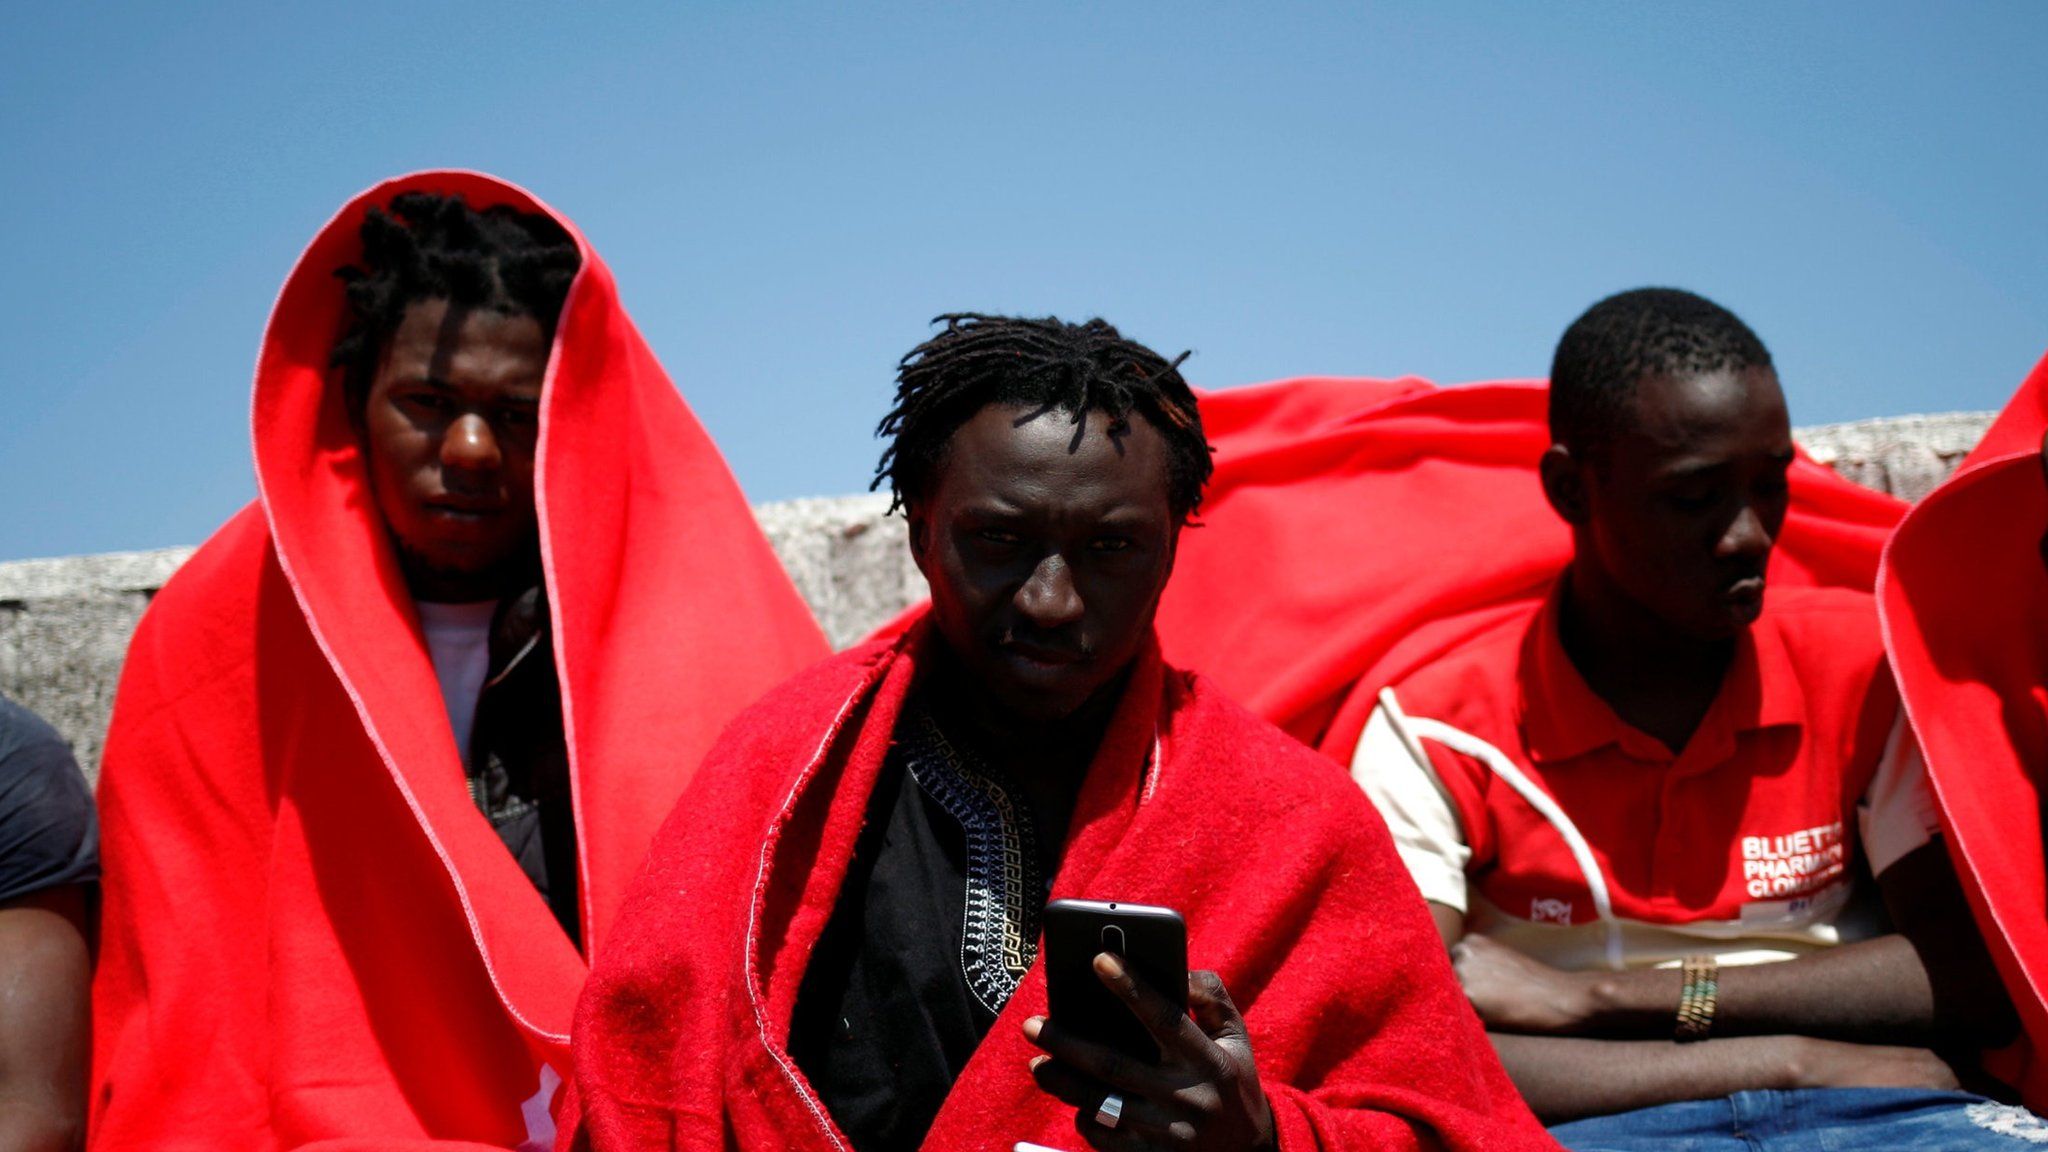 migrant arrives in Spain after rescue